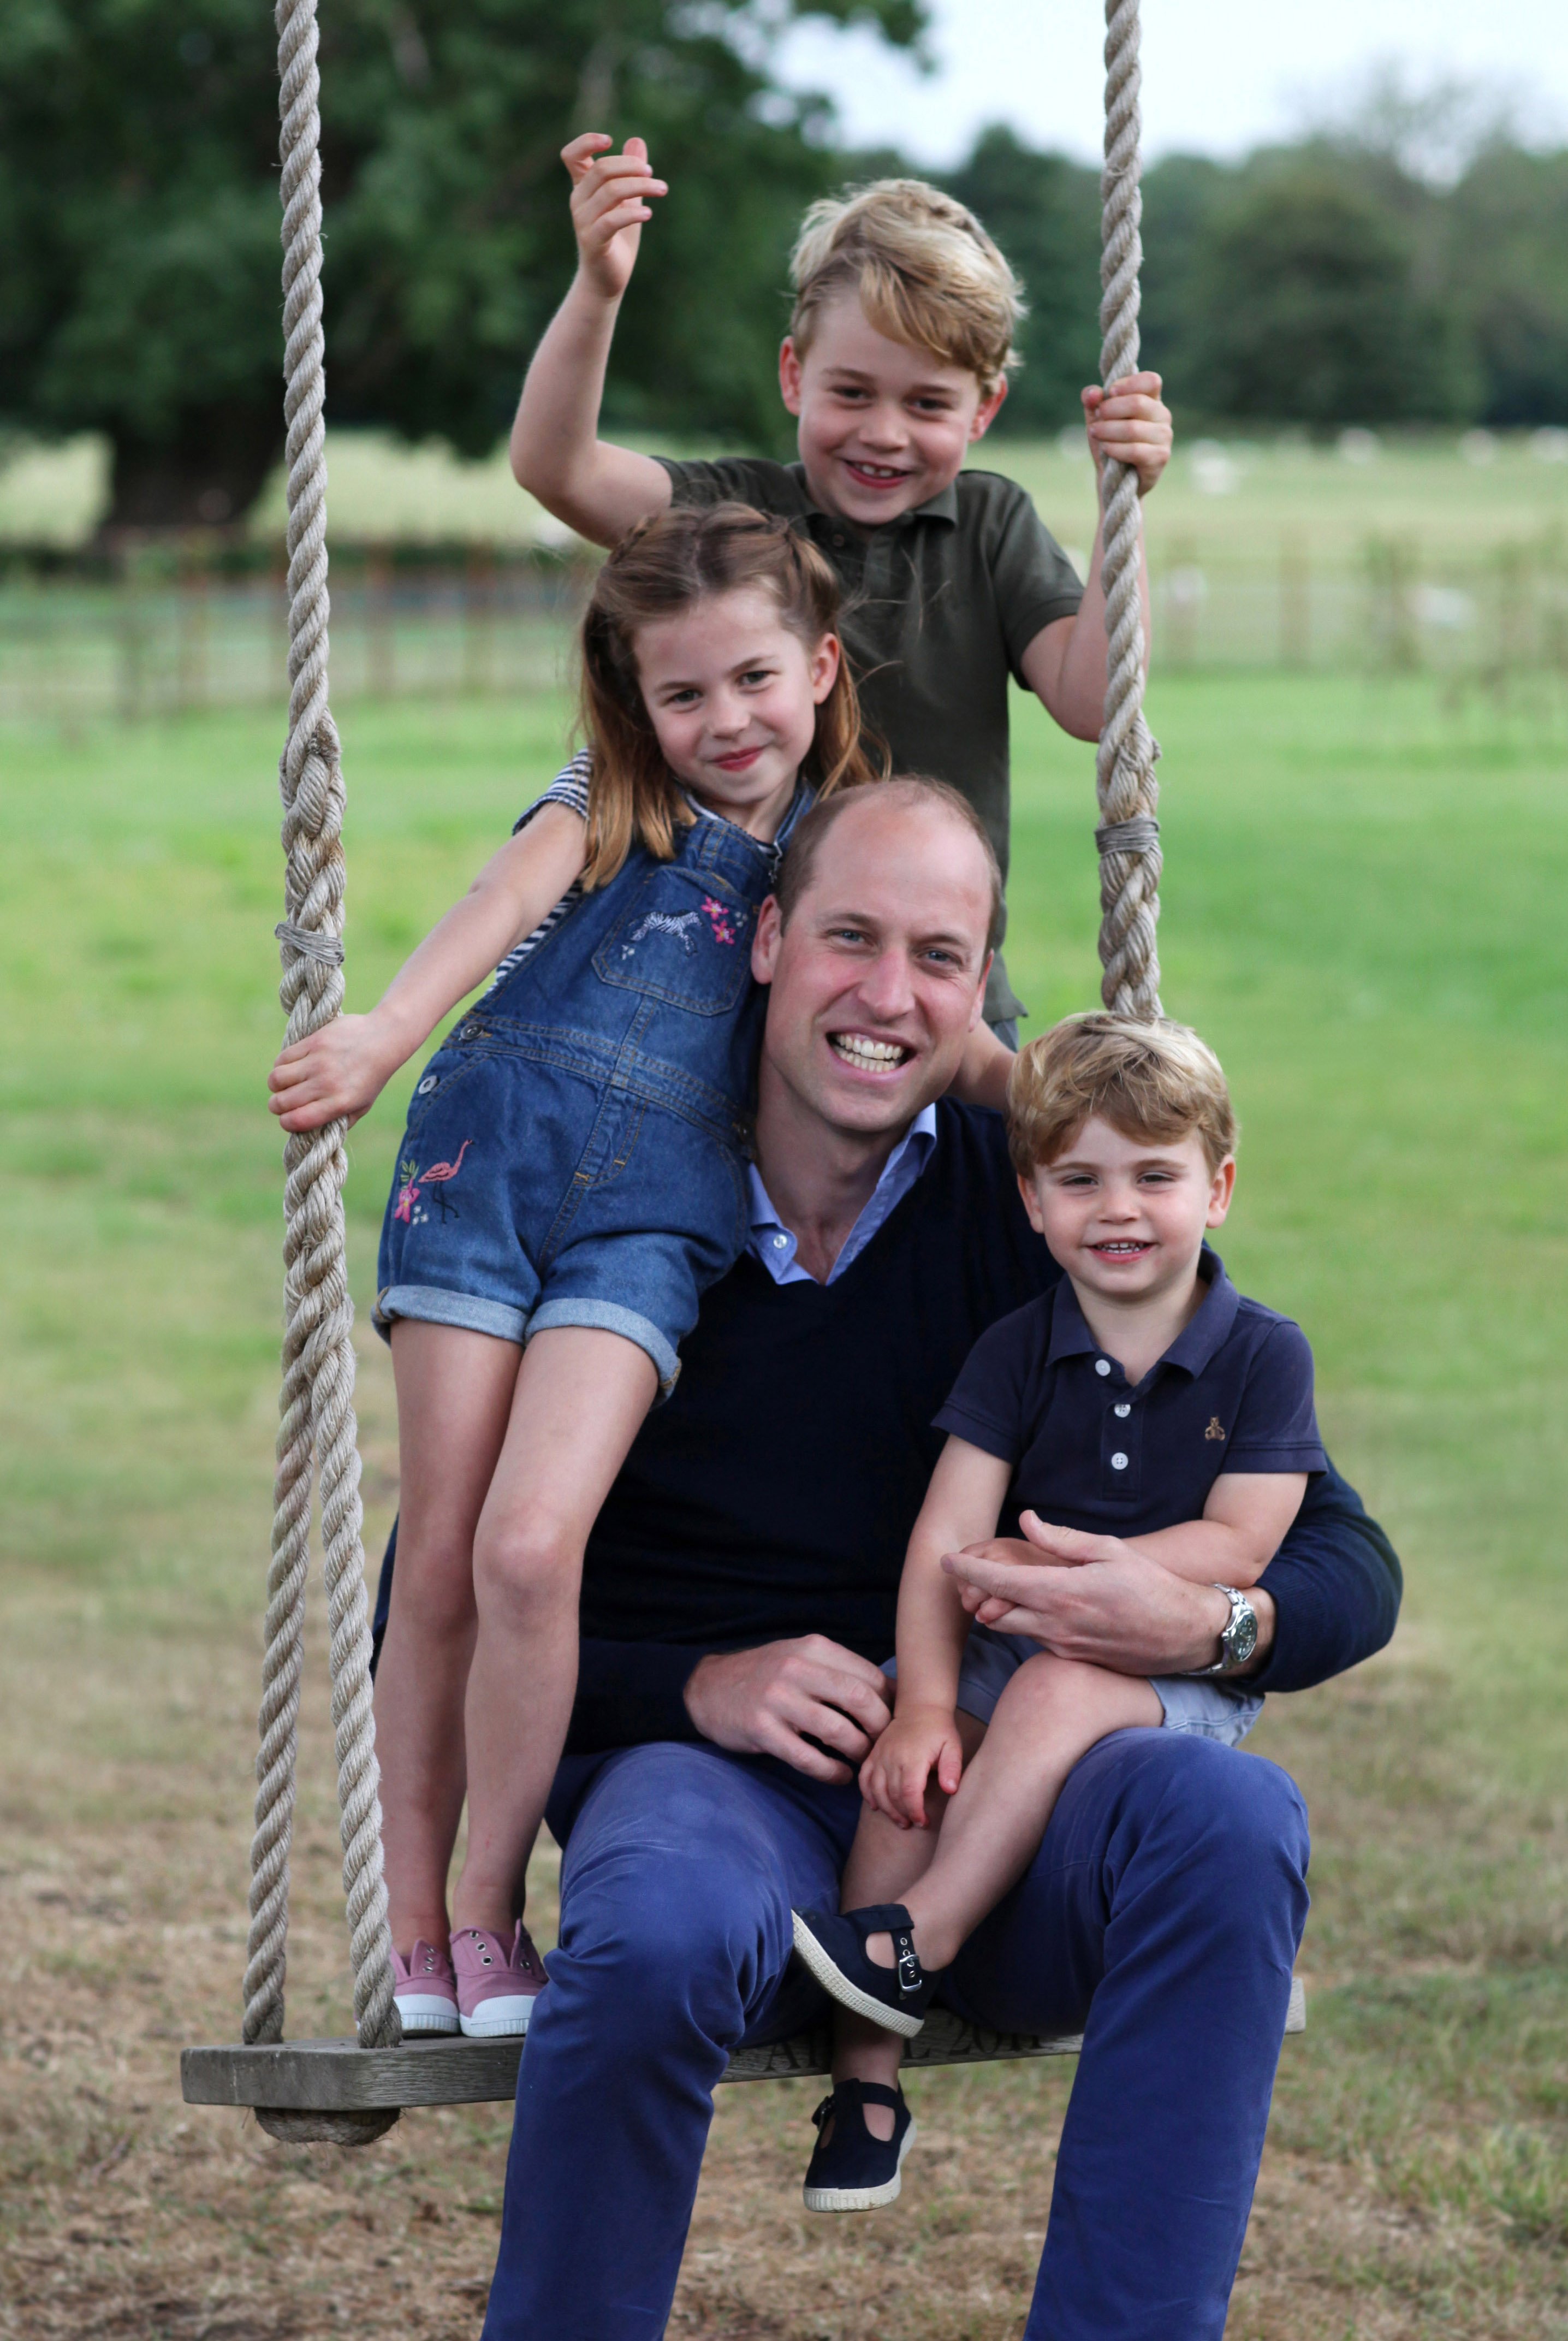 Princess Charlotte, Prince George, and Prince Louis, with their father Prince William pose for Williams' birthday, photo taken June 20, 2020 | Photo: Getty Images